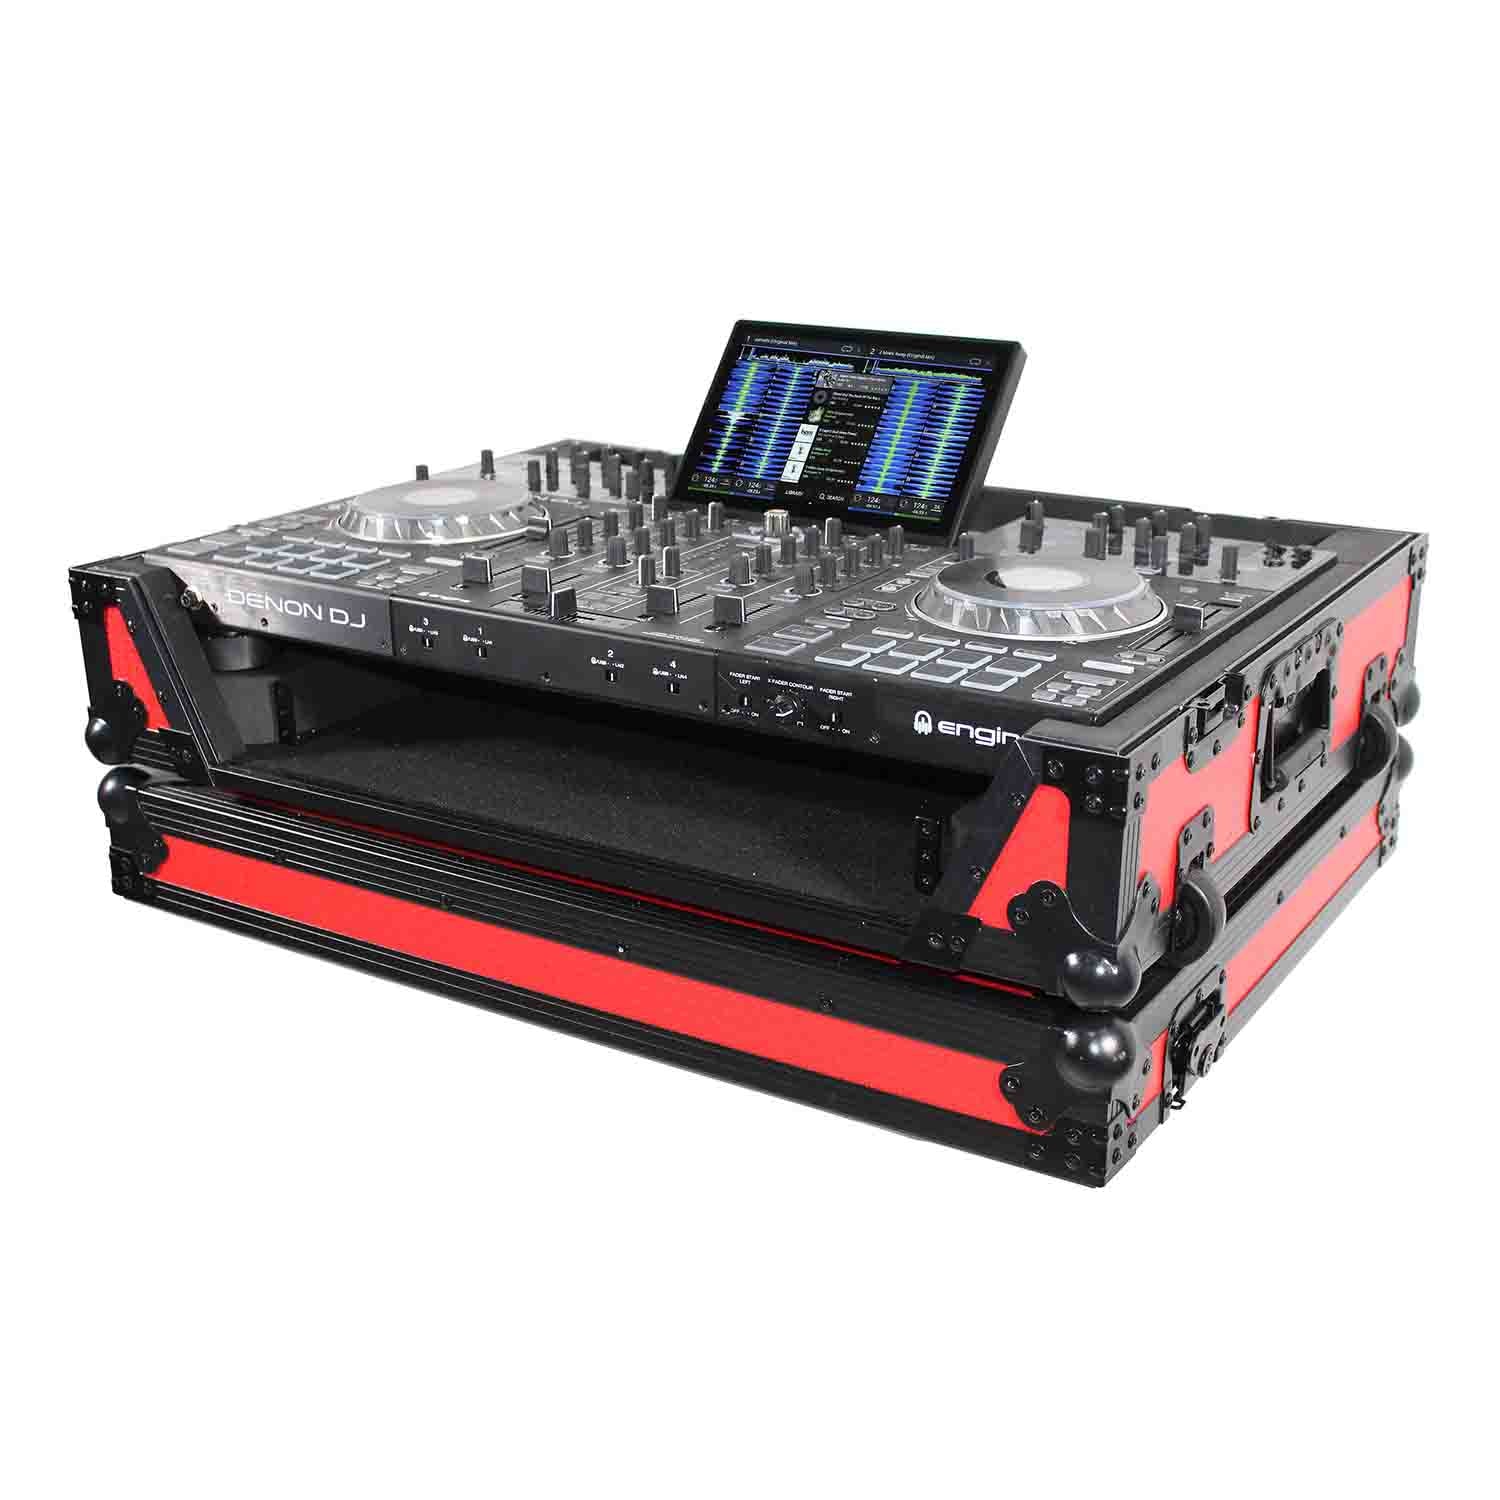 ProX XS-PRIME4 WRB, DJ Flight Case for Denon Prime 4 Standalone DJ System with Wheels - Black on Red - Hollywood DJ